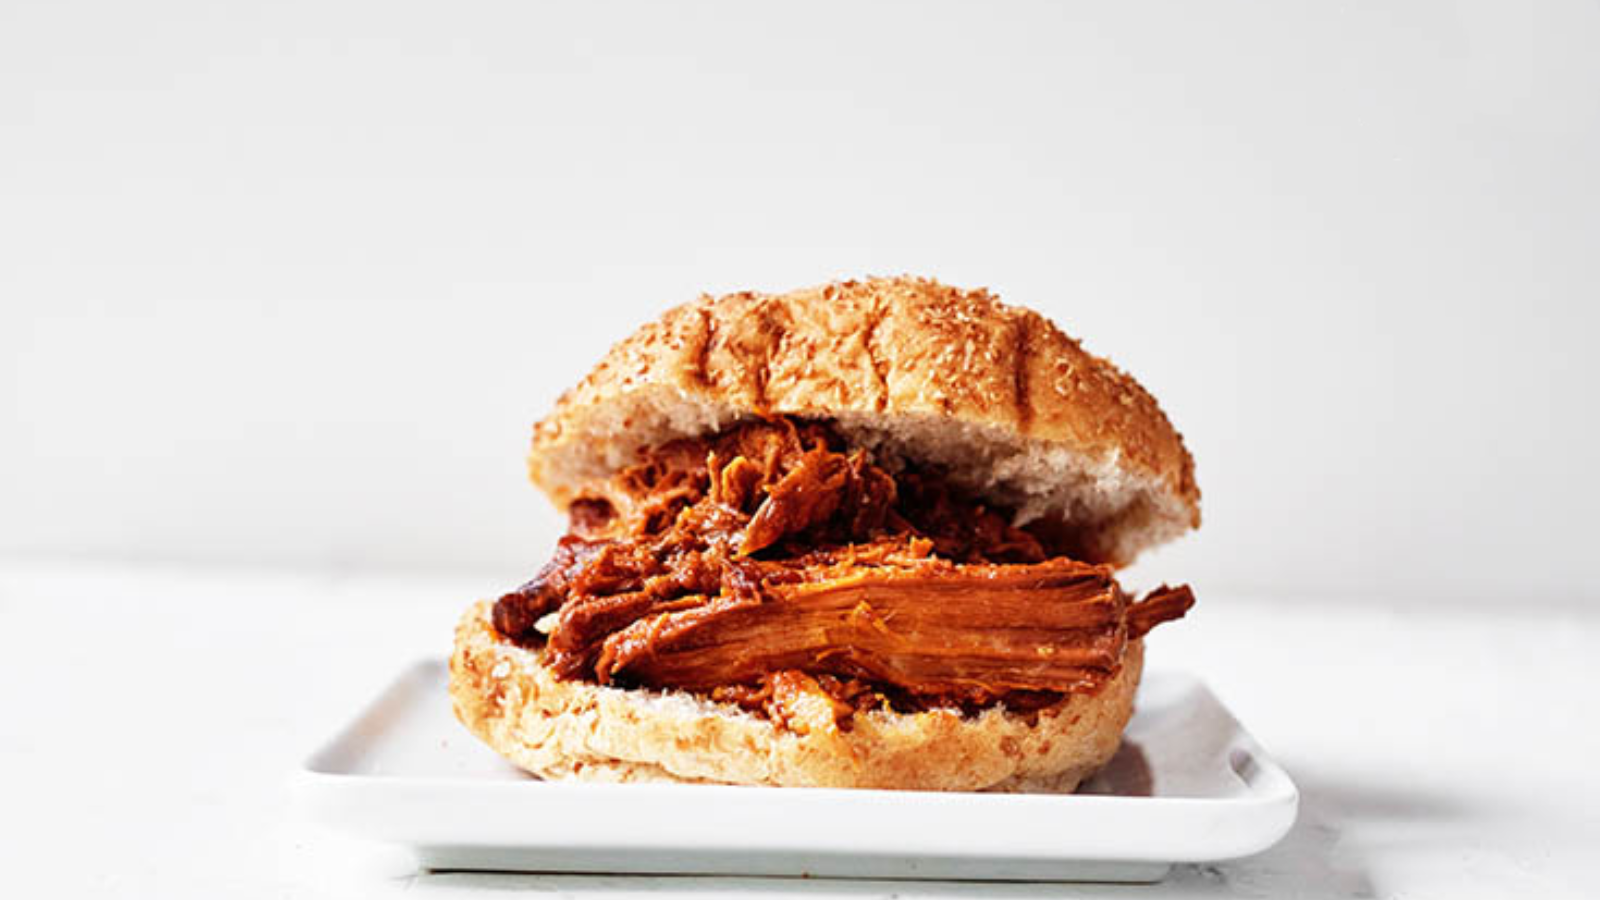 15 Sandwiches You Have To Try